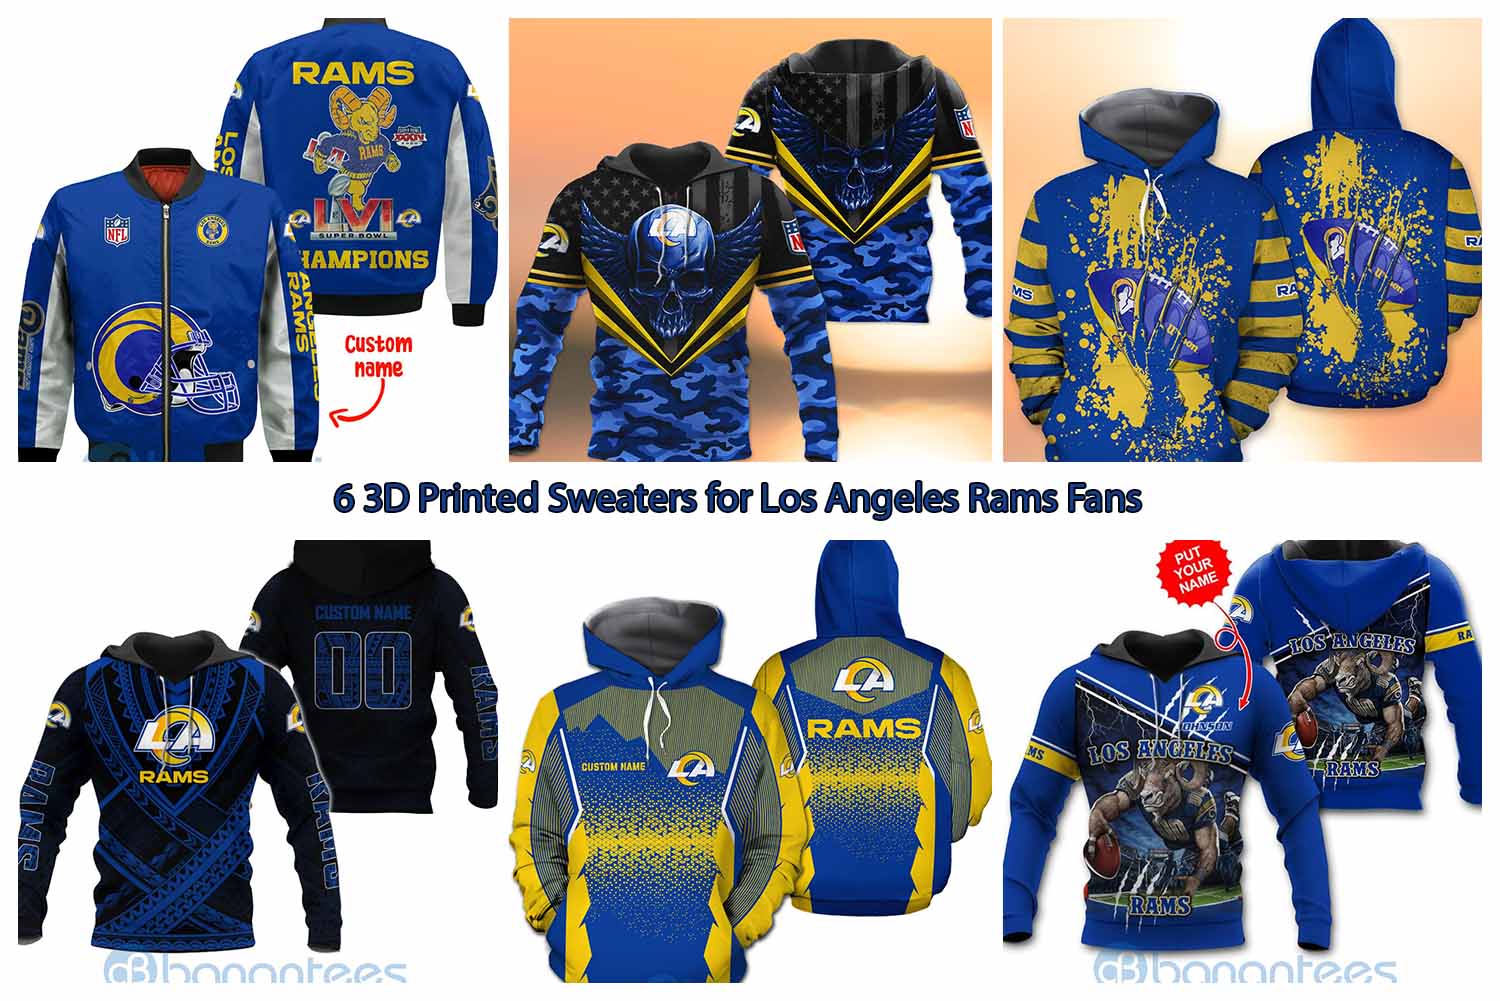 6 3D Printed Sweaters for Los Angeles Rams Fans